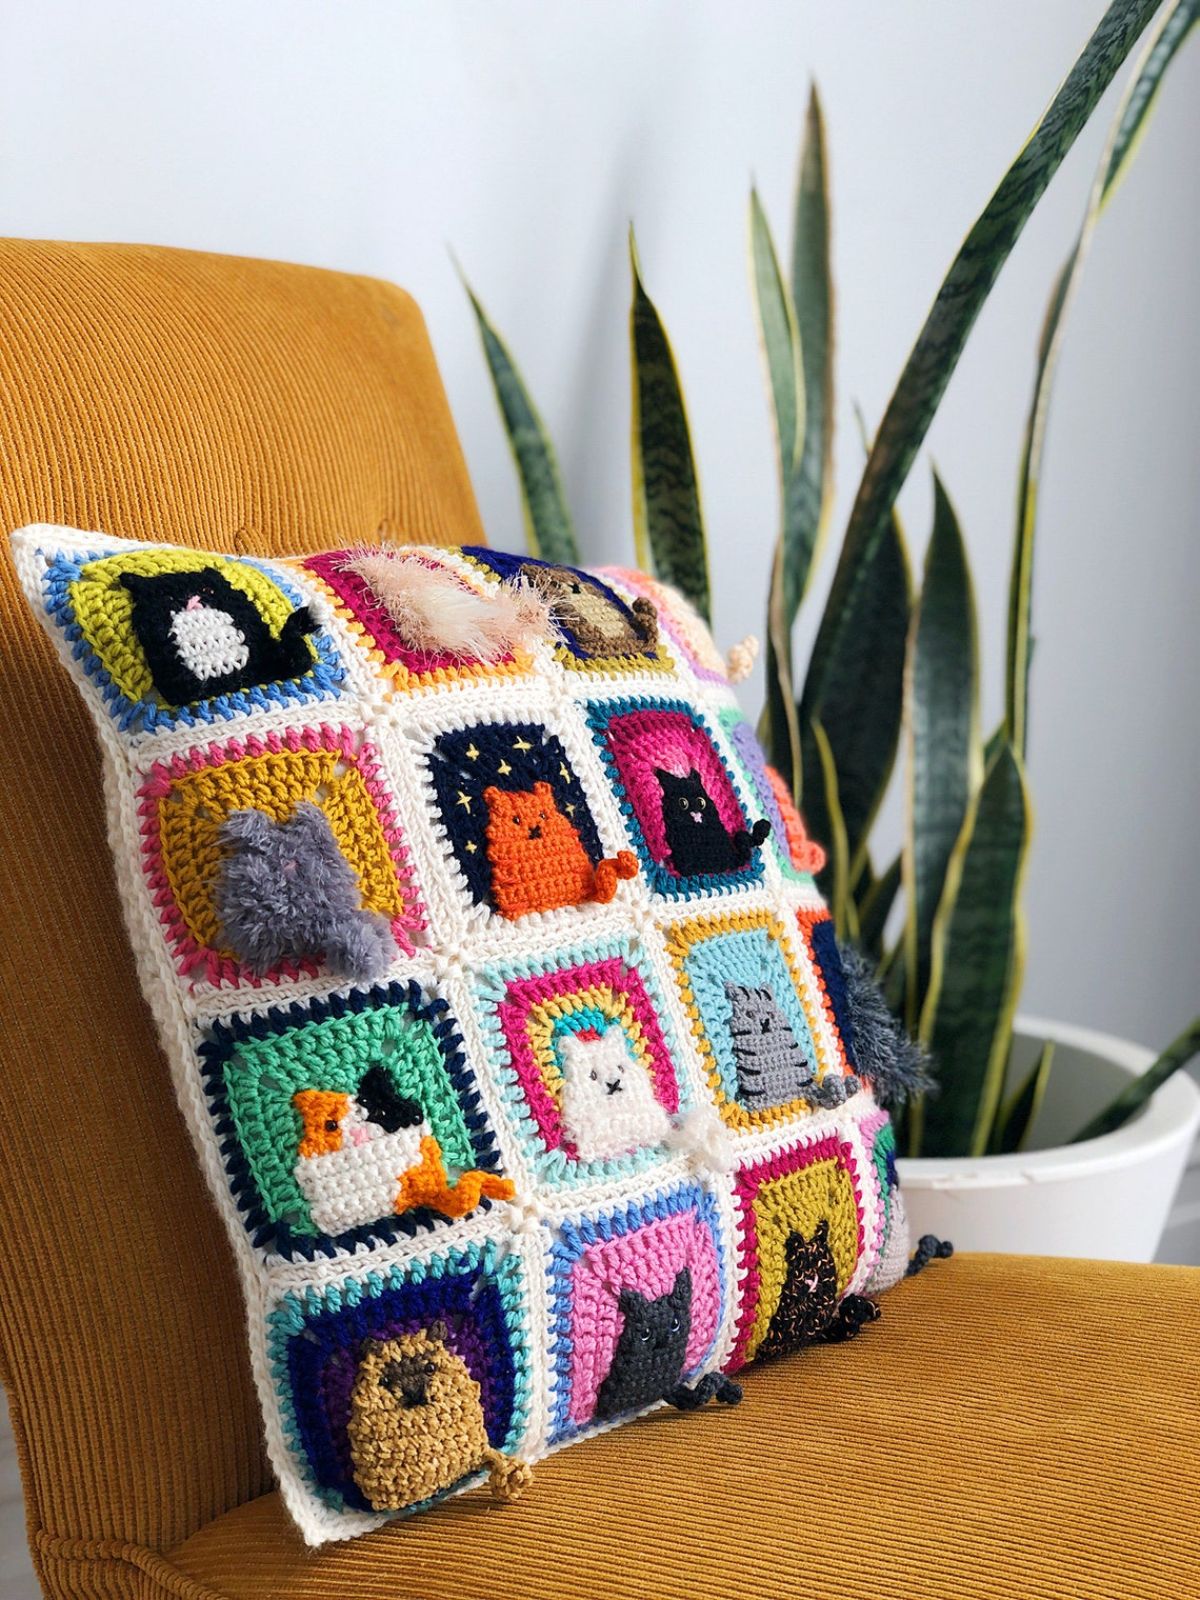 White crochet cushion with sixteen bright colored squares with a different cat stitched into each square on a yellow chair.